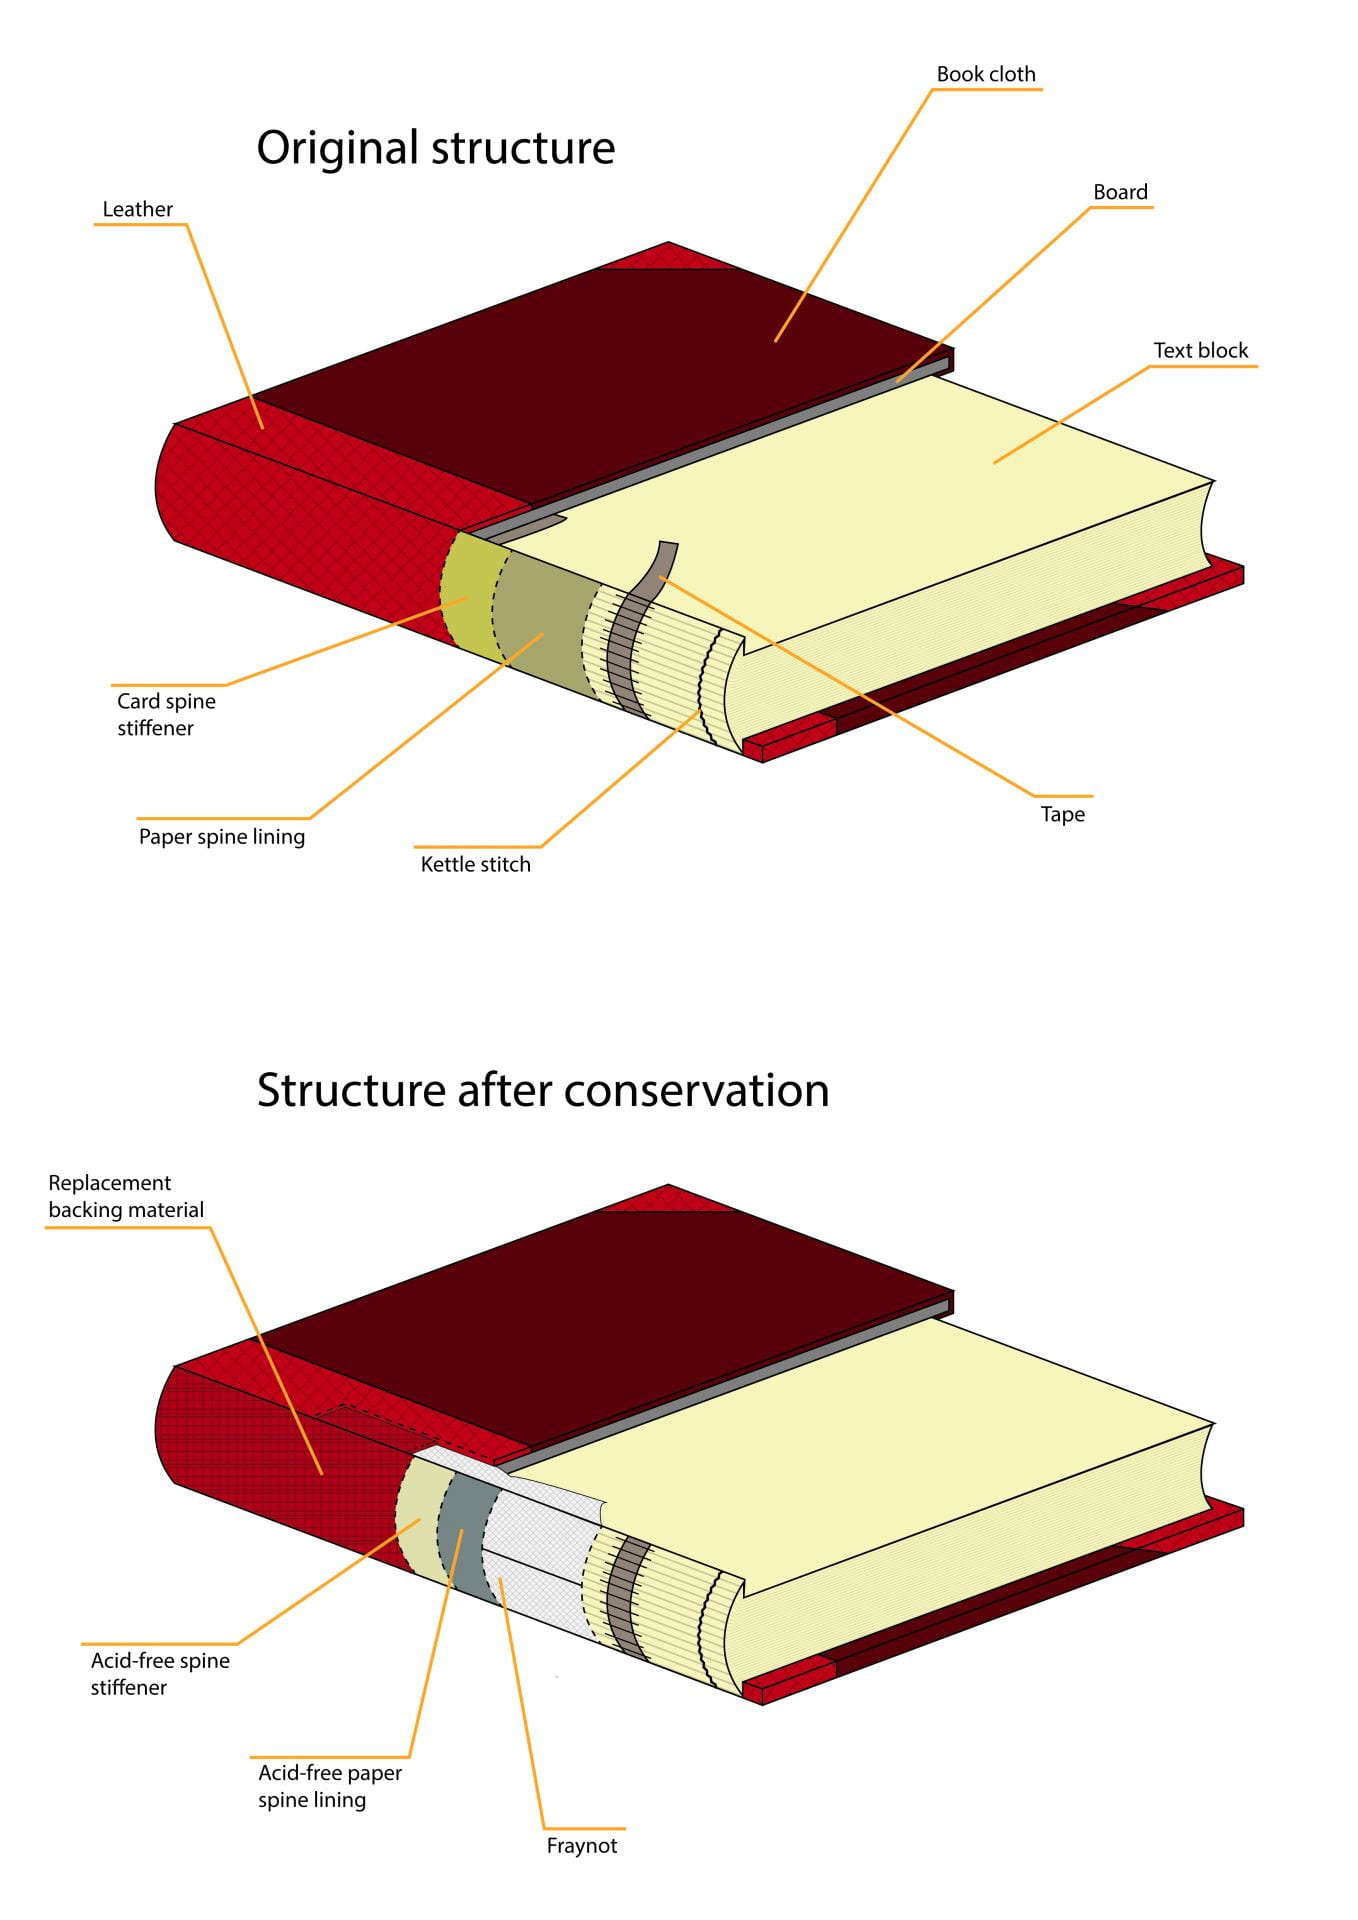 Diagrams of a 19th century book, showing the structure of the binding before and after conservation treatment.